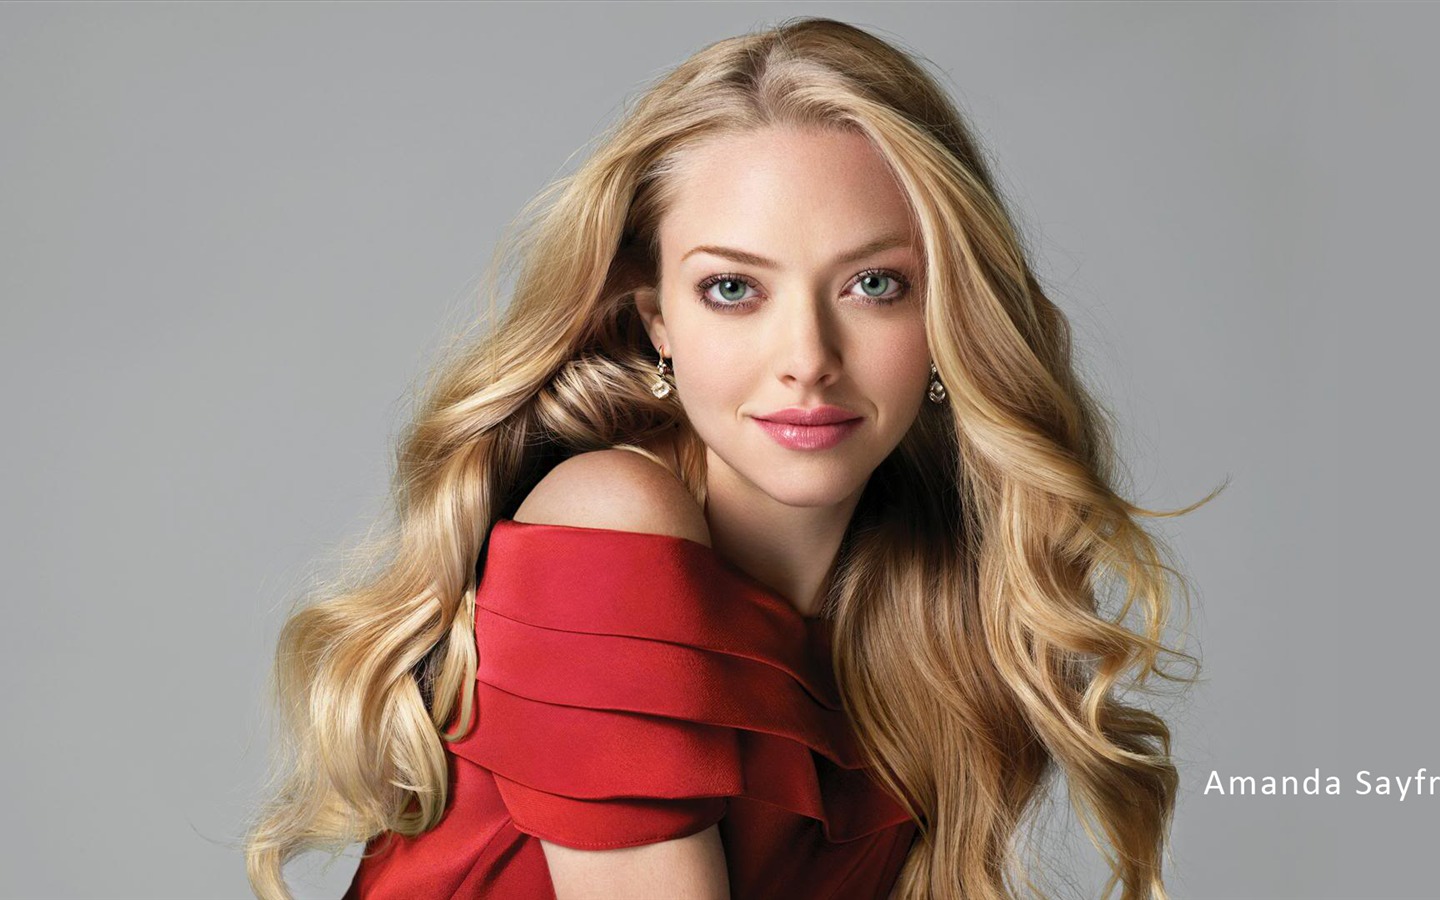 Amanda Seyfried #001 - 1440x900 Wallpapers Pictures Photos Images